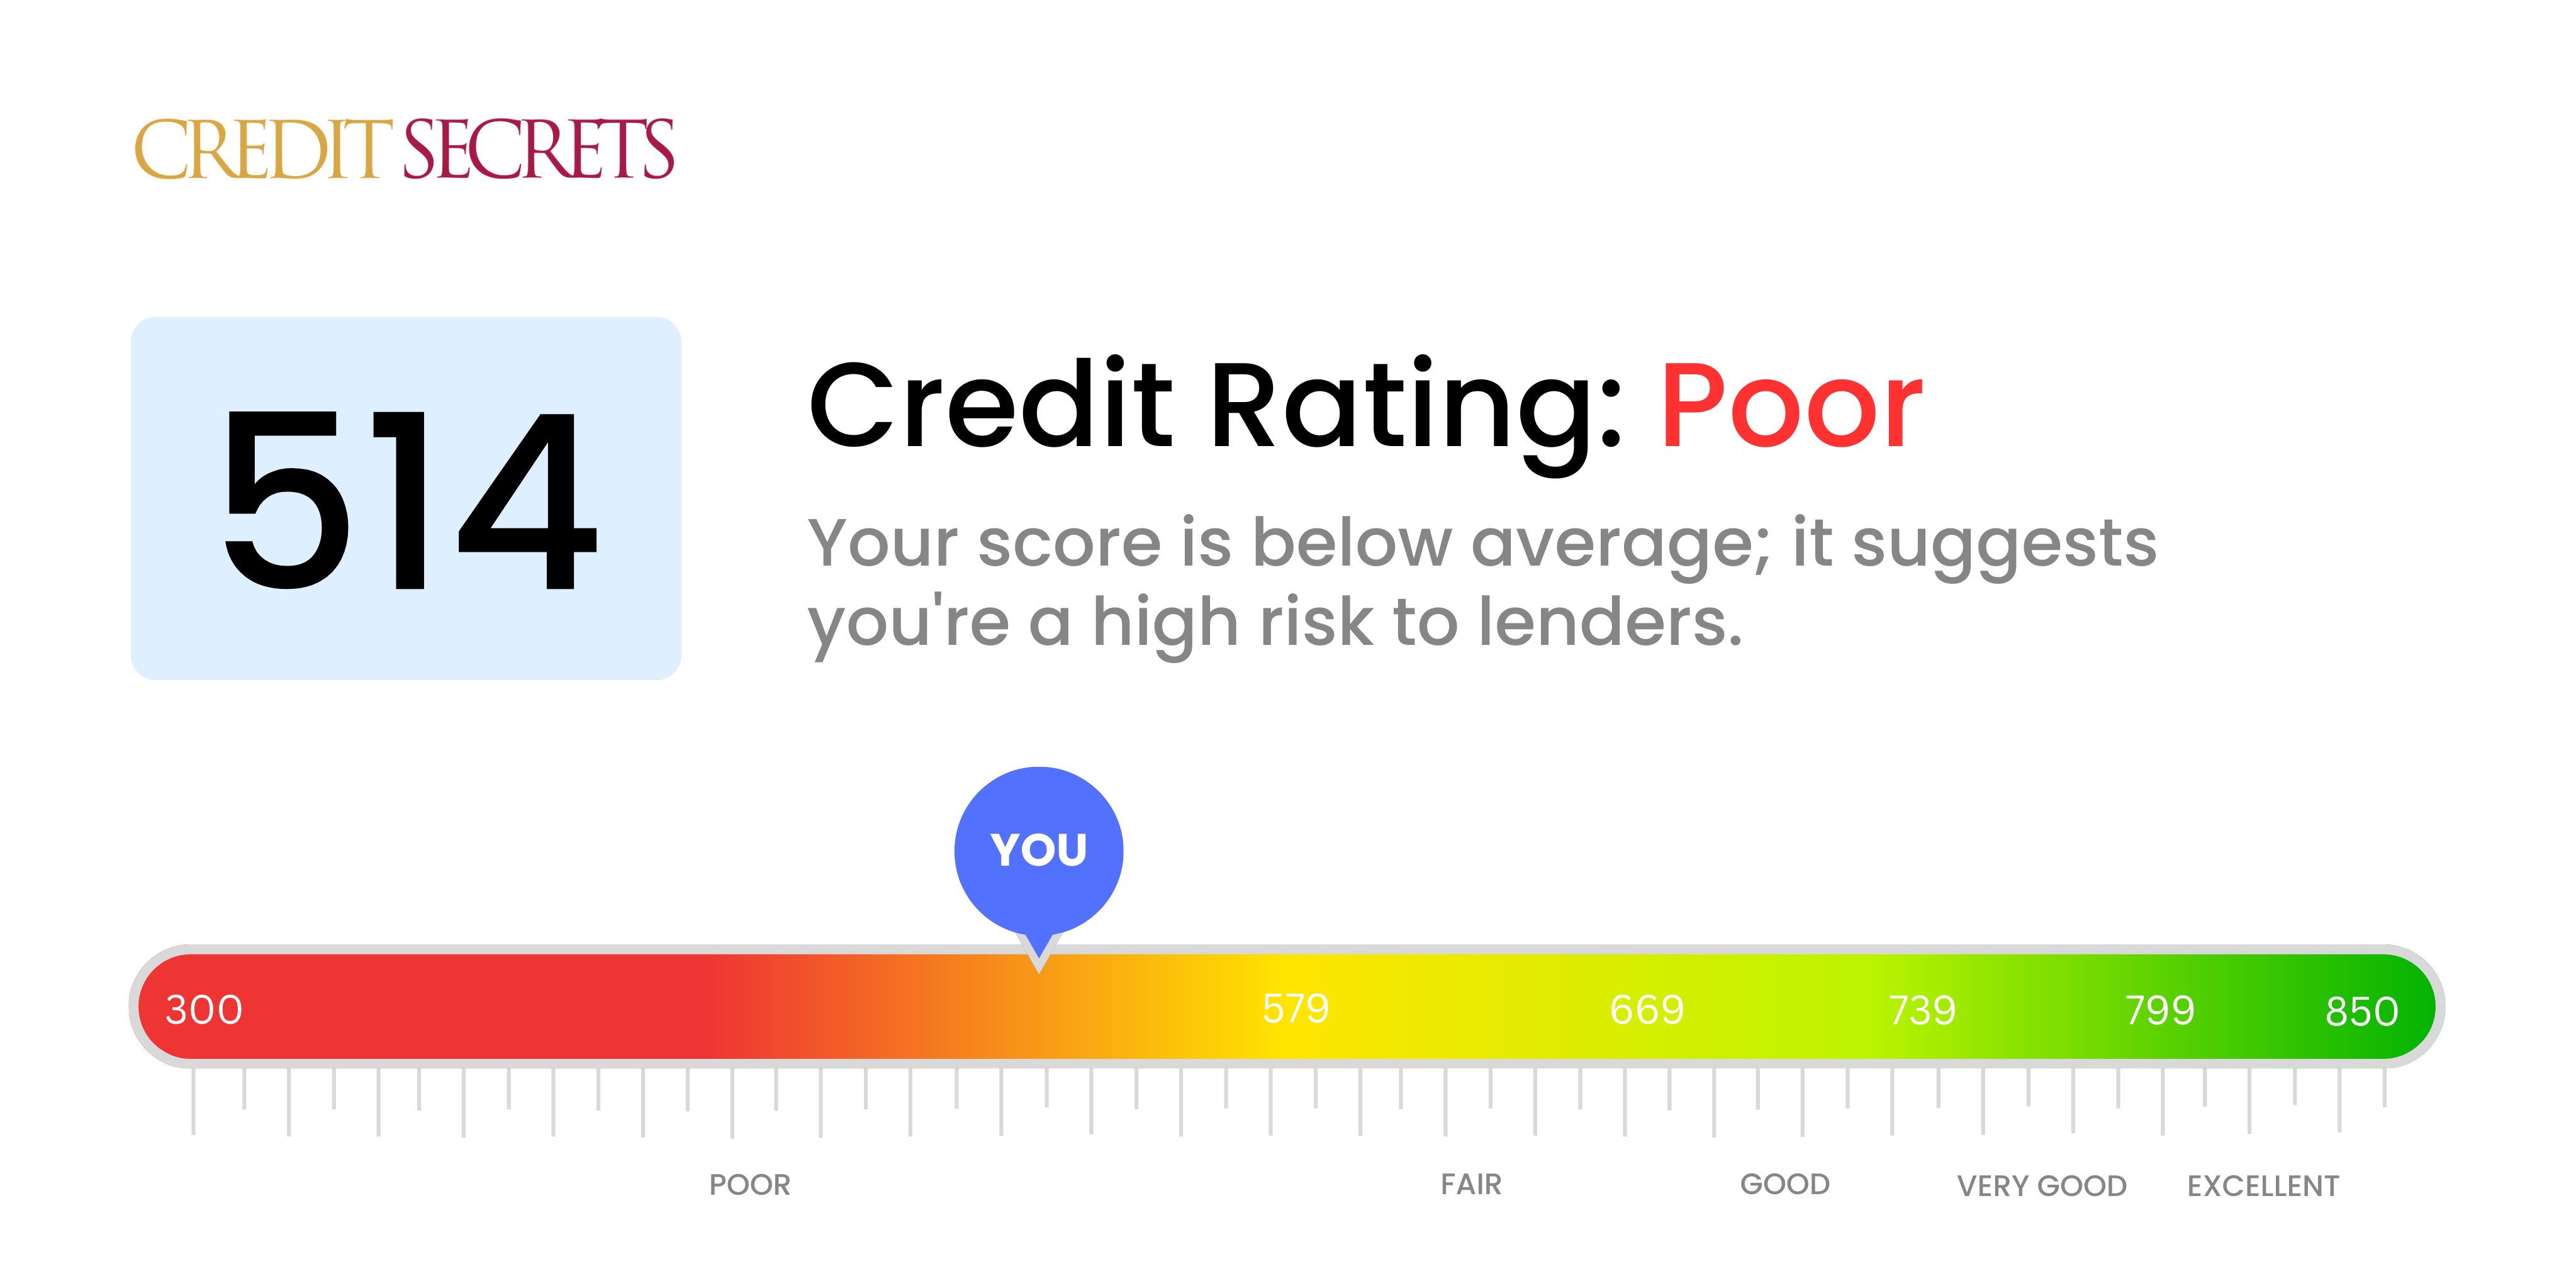 Is 514 a good credit score?